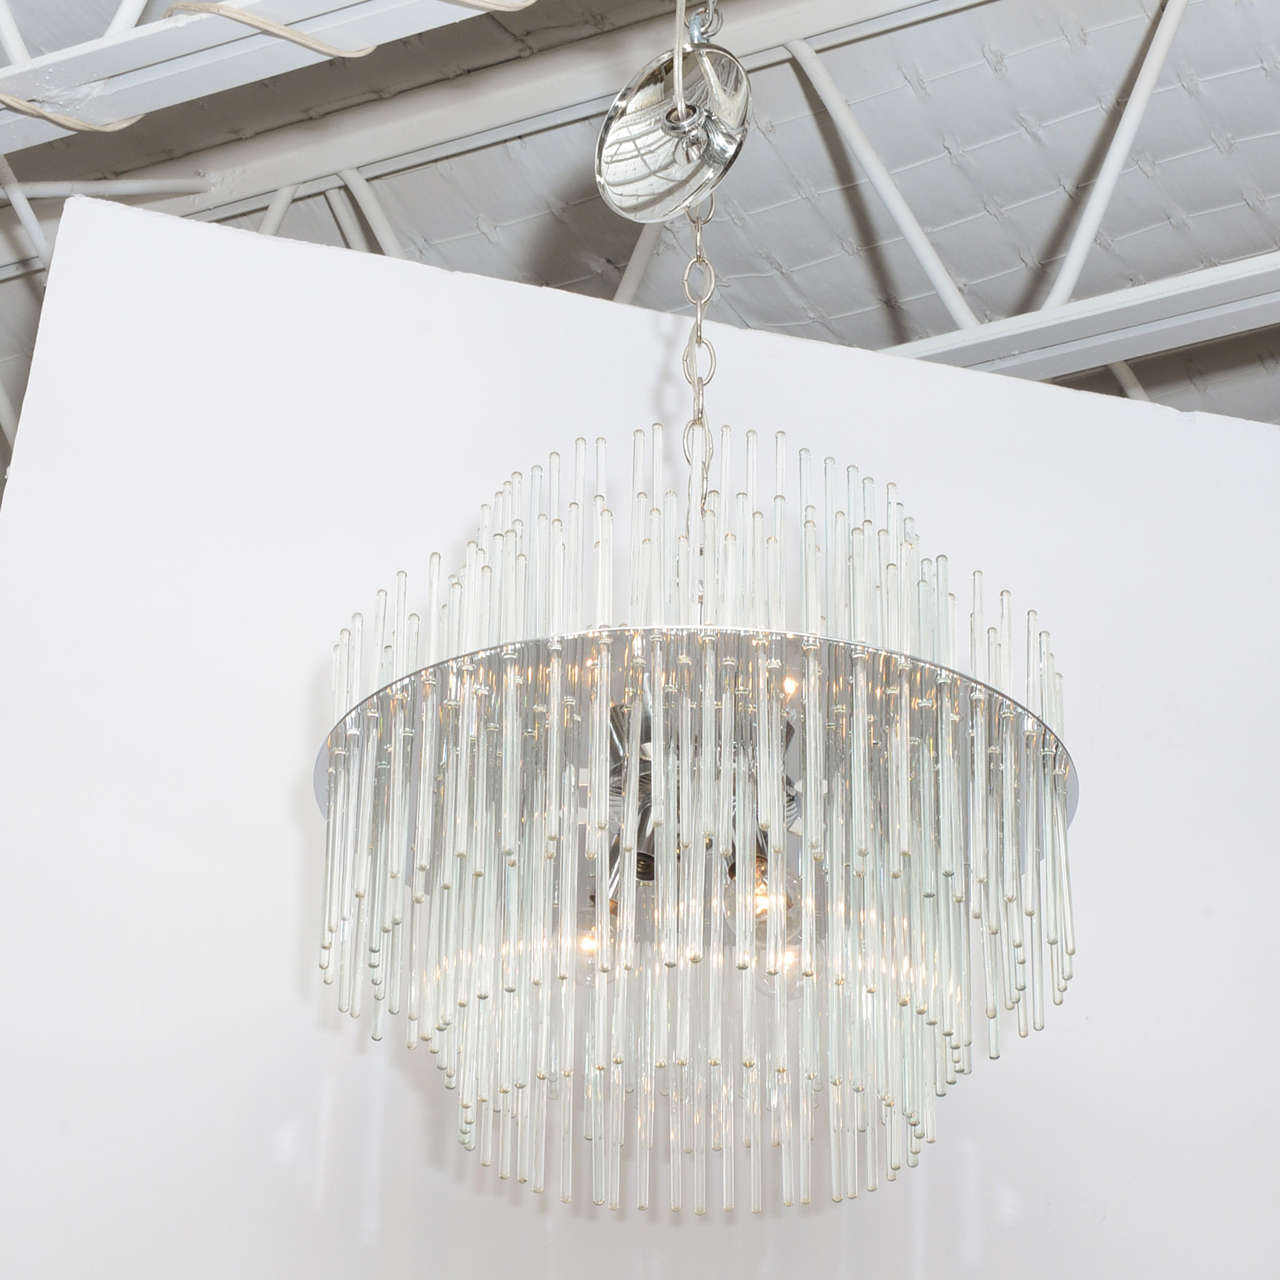 A Lightolier chandelier, designed by Gaetano Sciolari. handblown glass rods are suspended through a chrome frame, creating an especially enchanting effect after dark!